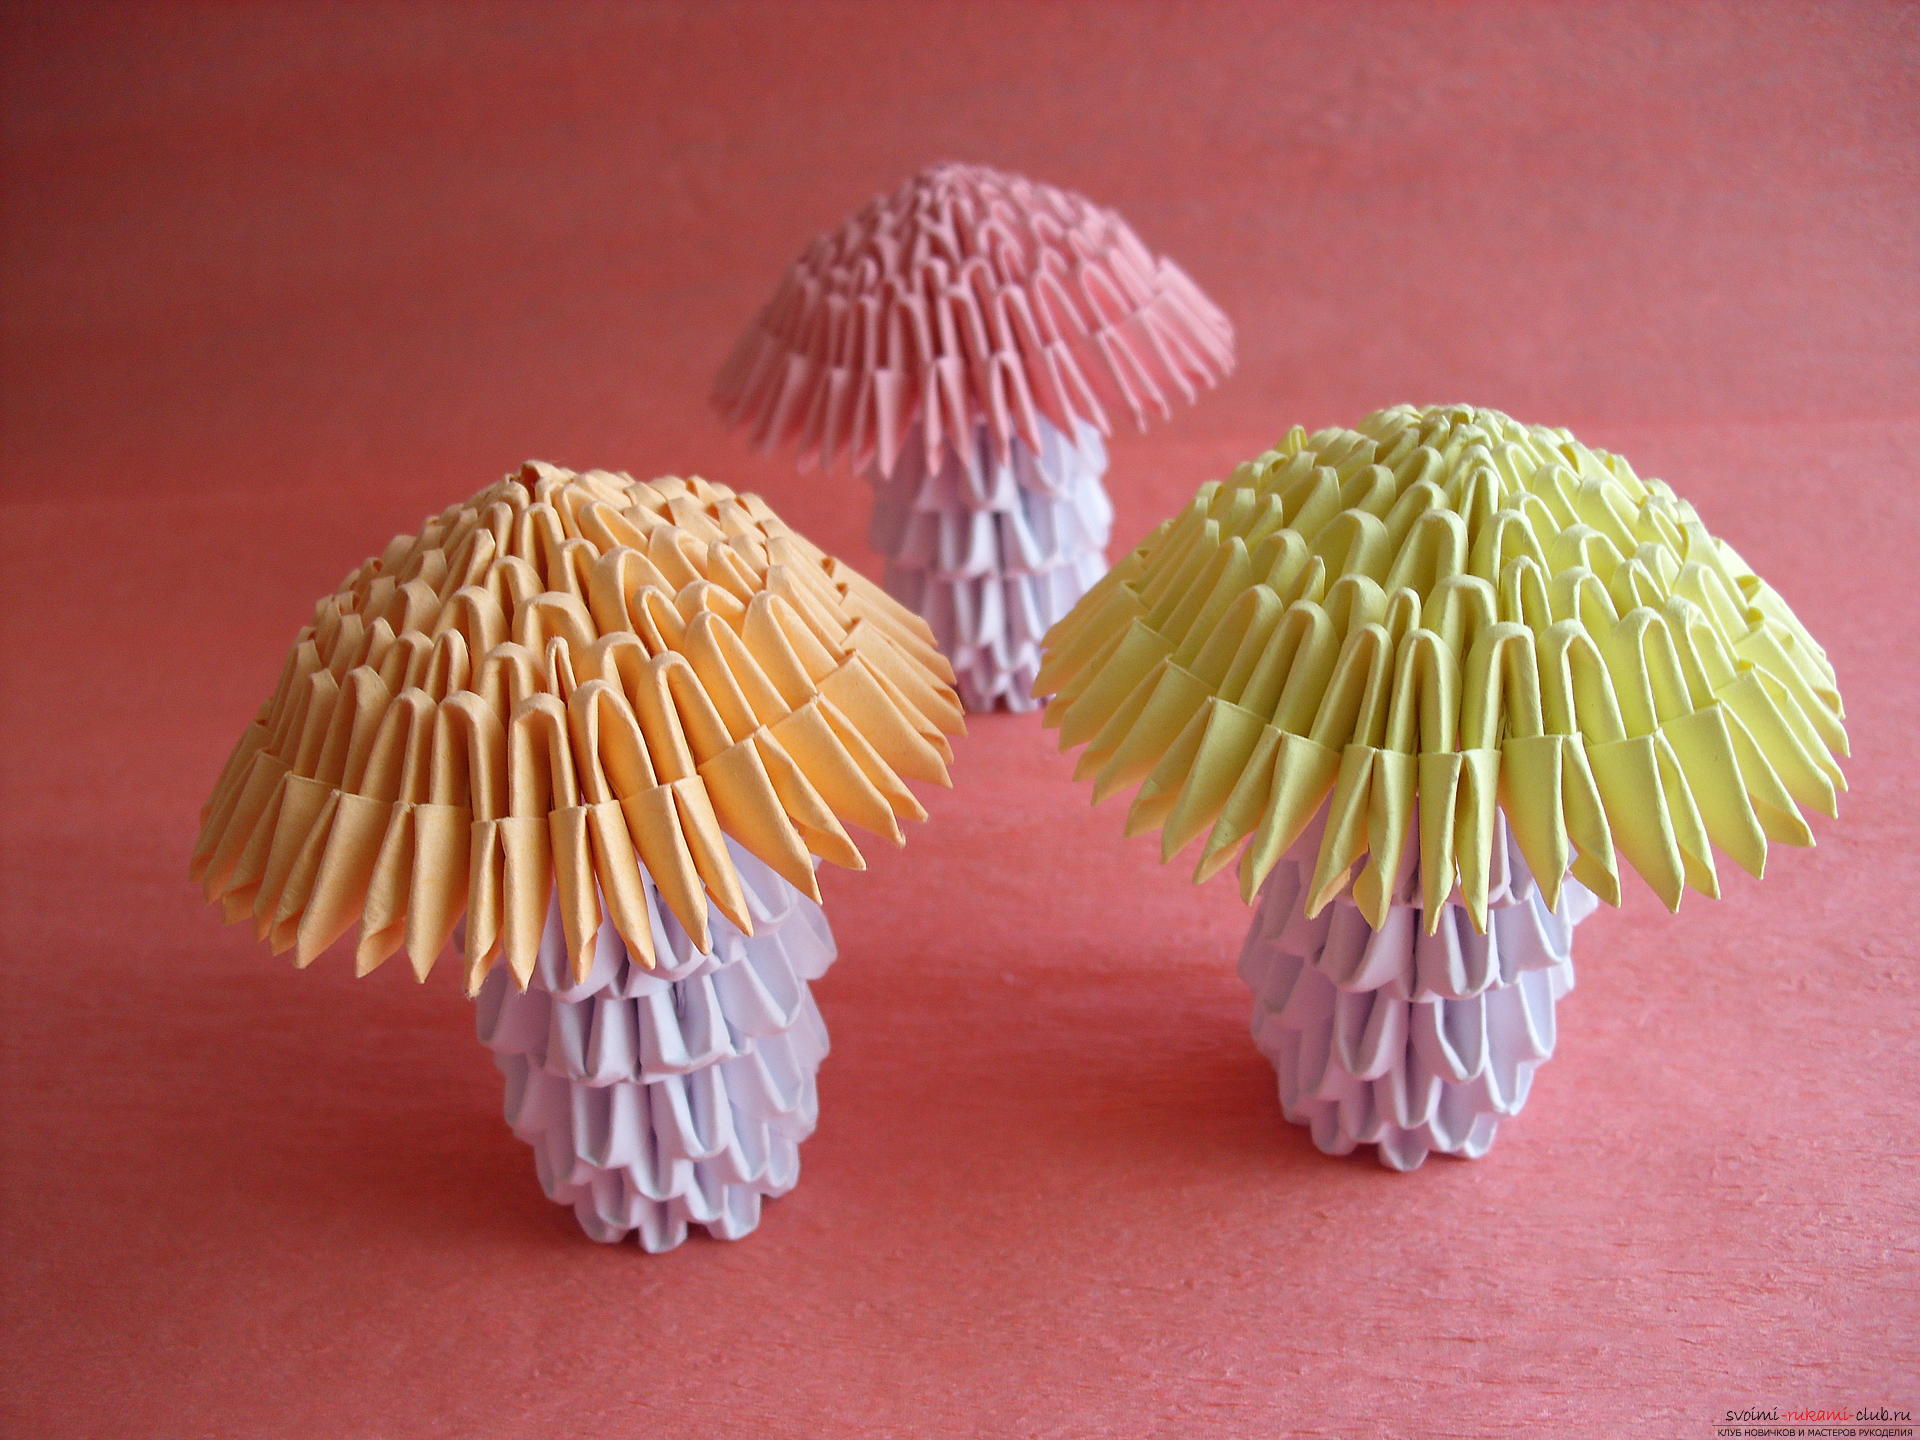 This master class step by step modular origami with photos will teach you how to make your own handiwork - a fungus .. Photo # 1